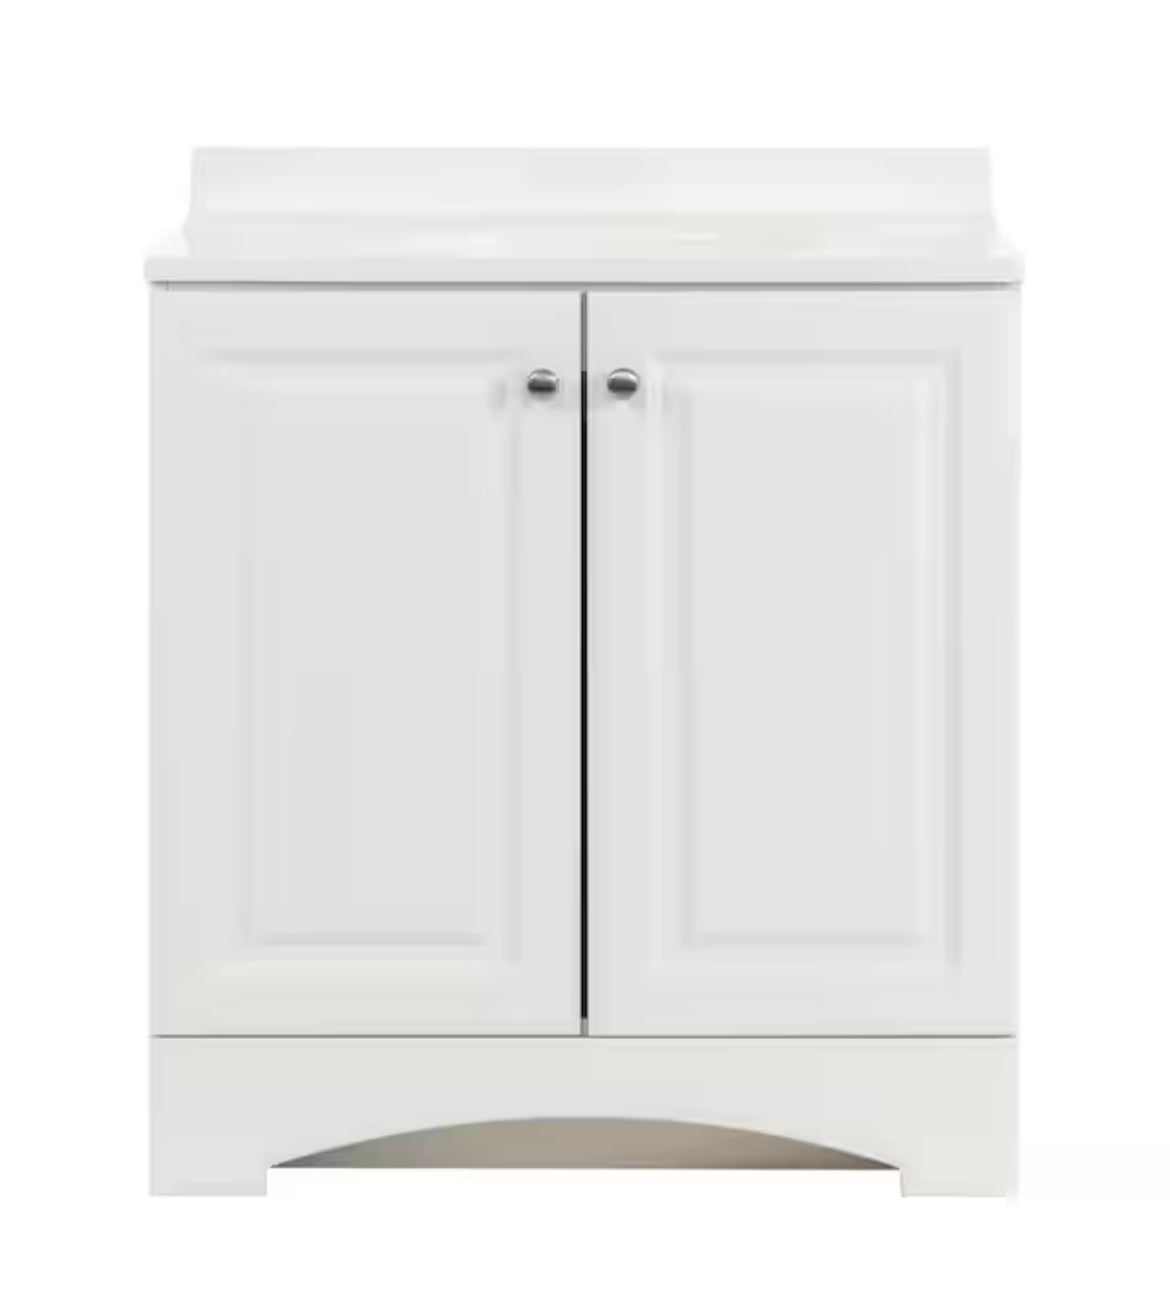 30 in. W x 19 in. D x 35 in. H Single Sink Freestanding Bath Vanity in White with White Cultured Marble Top